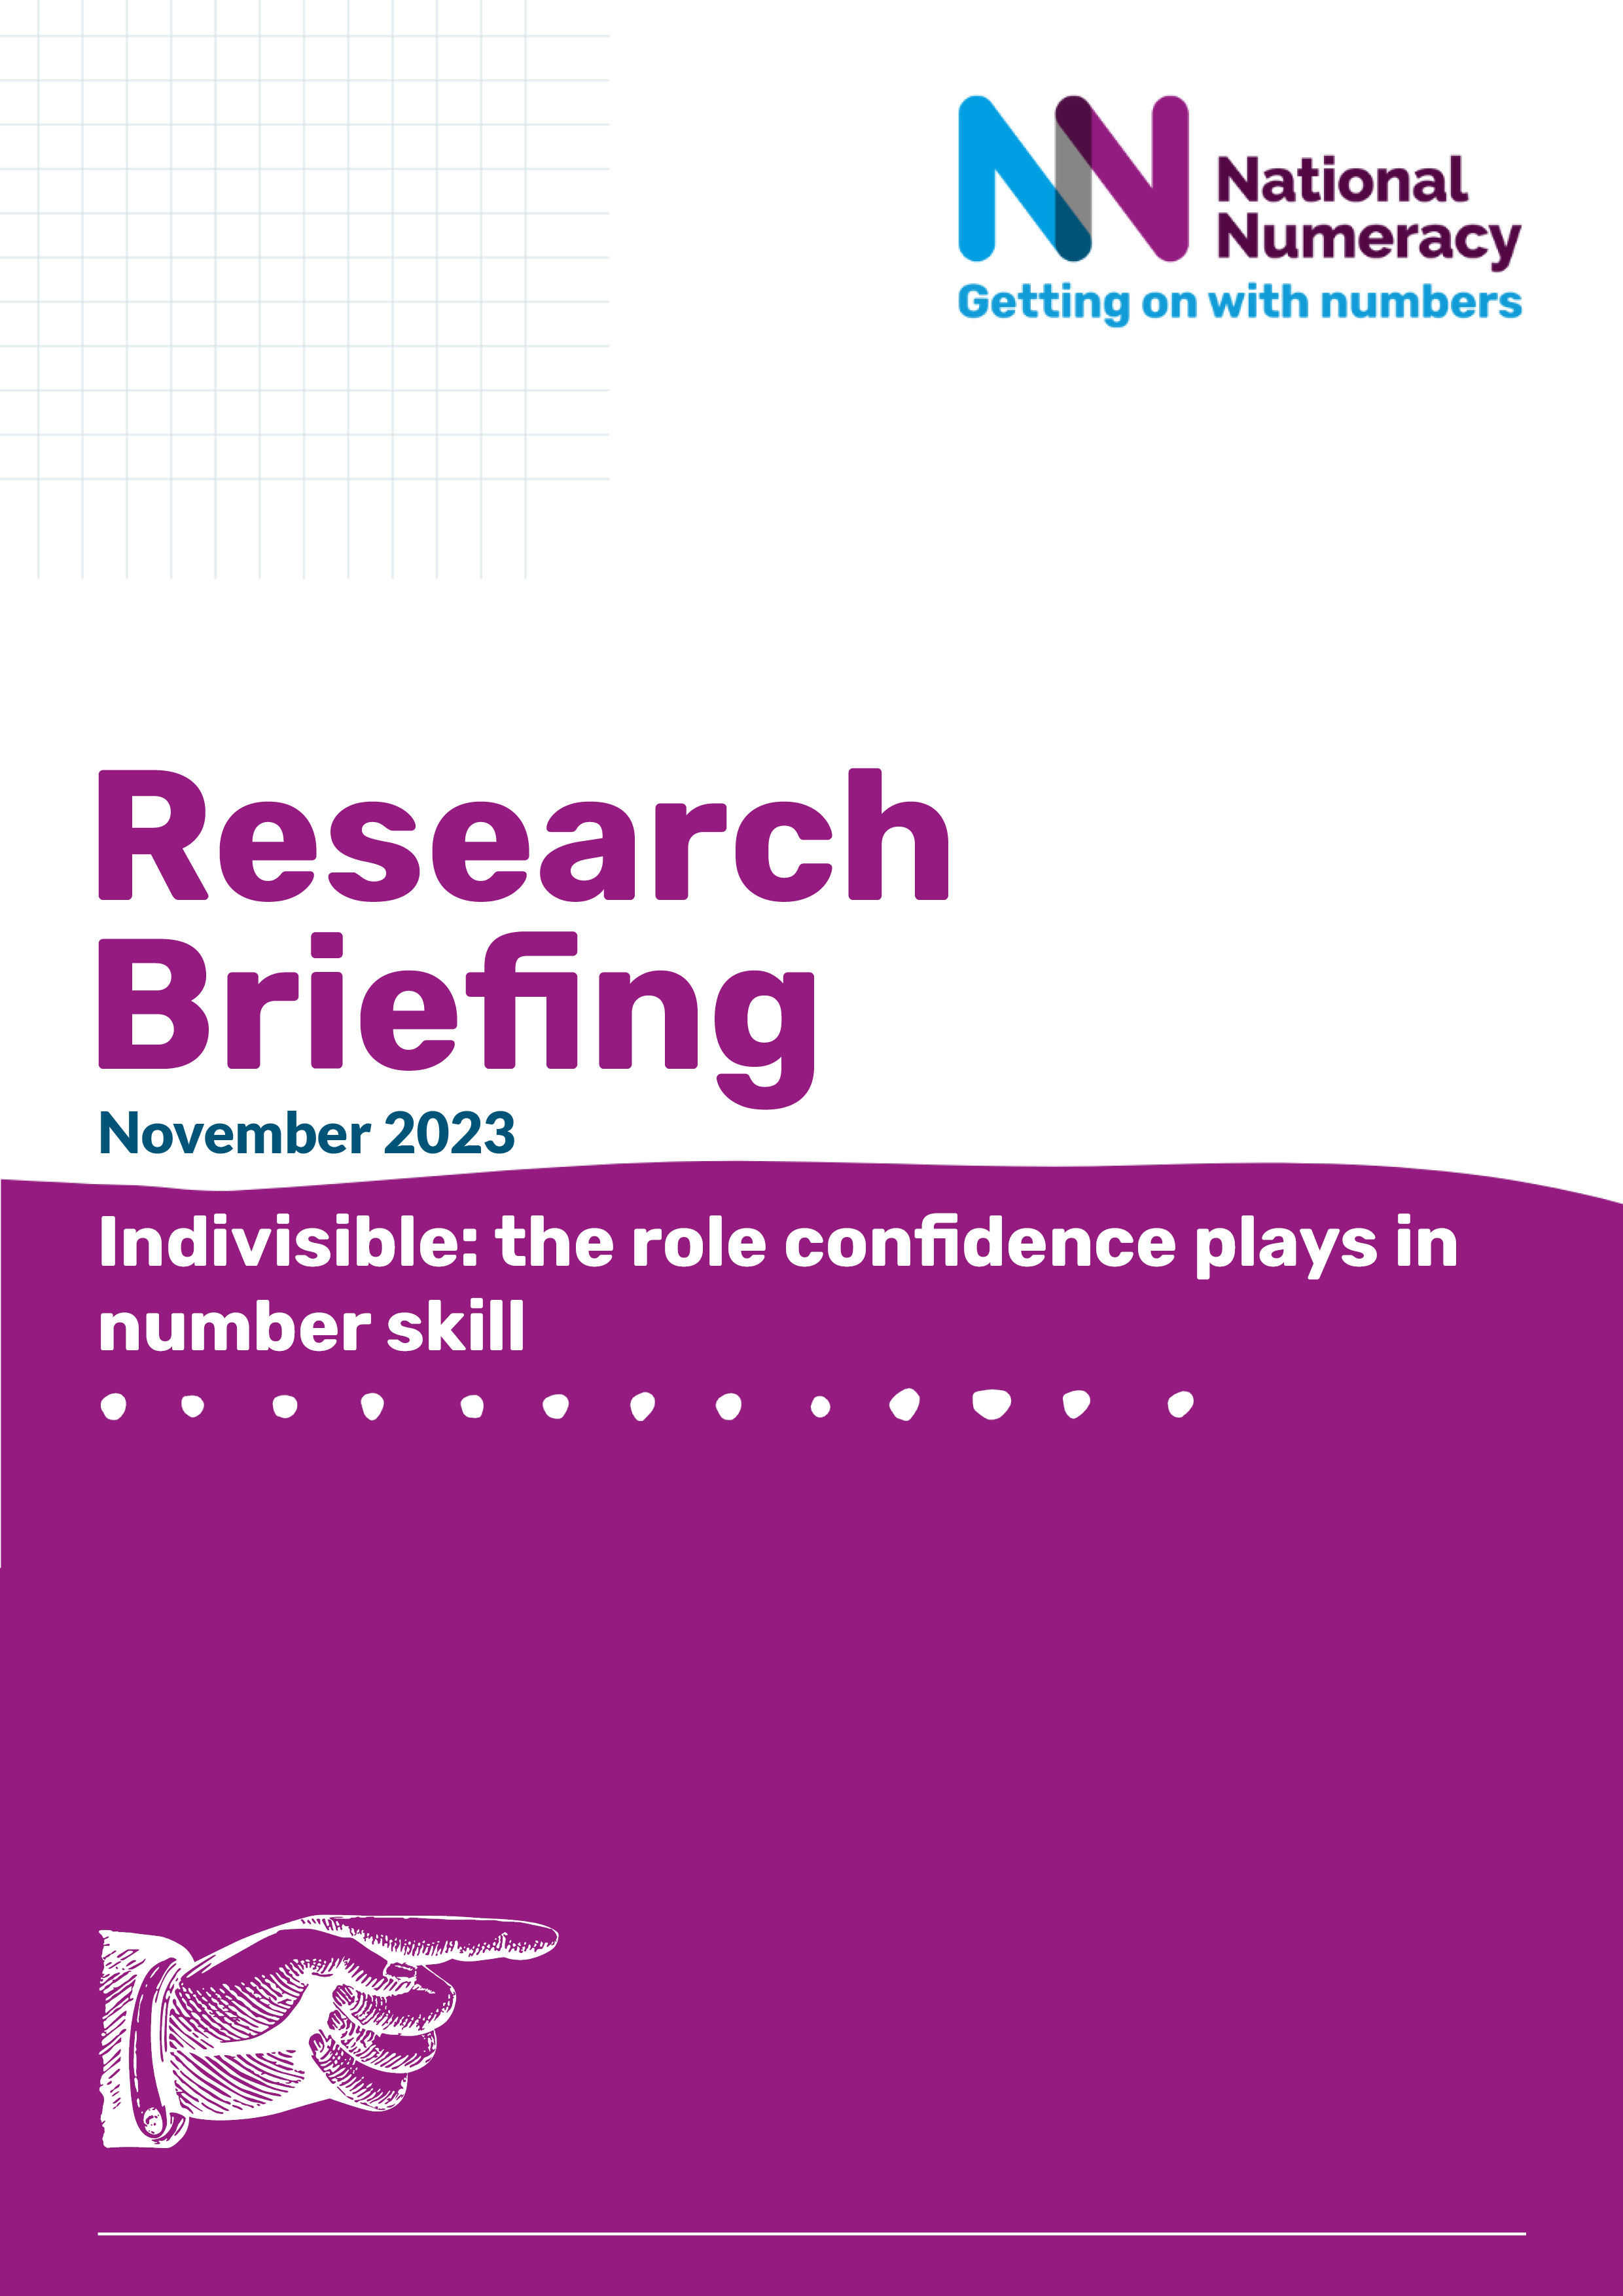 Research briefing cover